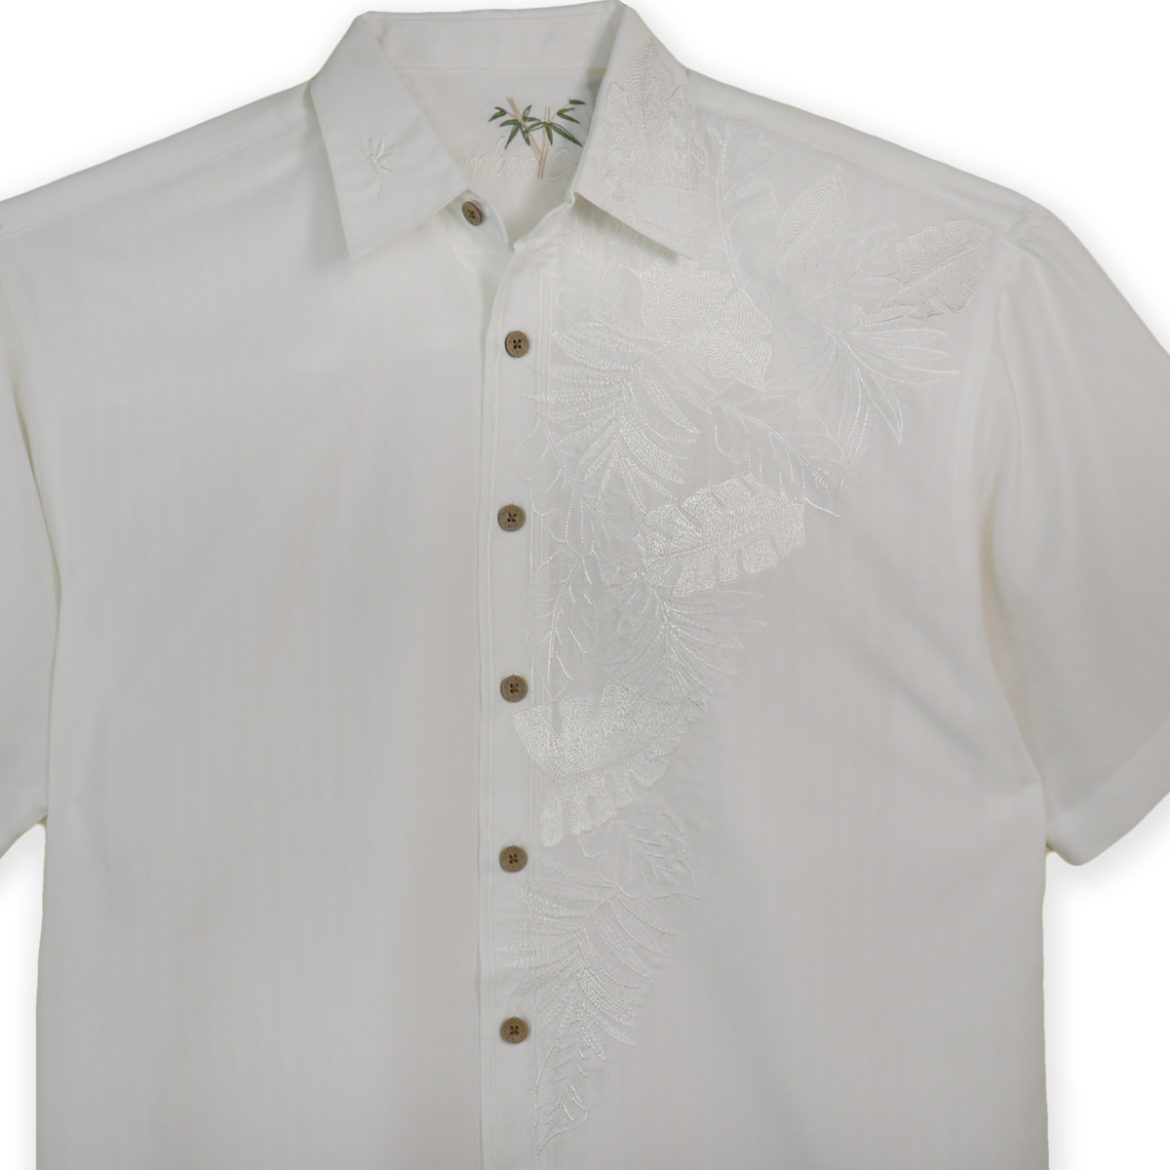 Bamboo Cay Men's Shirt - Moonlight fronds - white - front close up